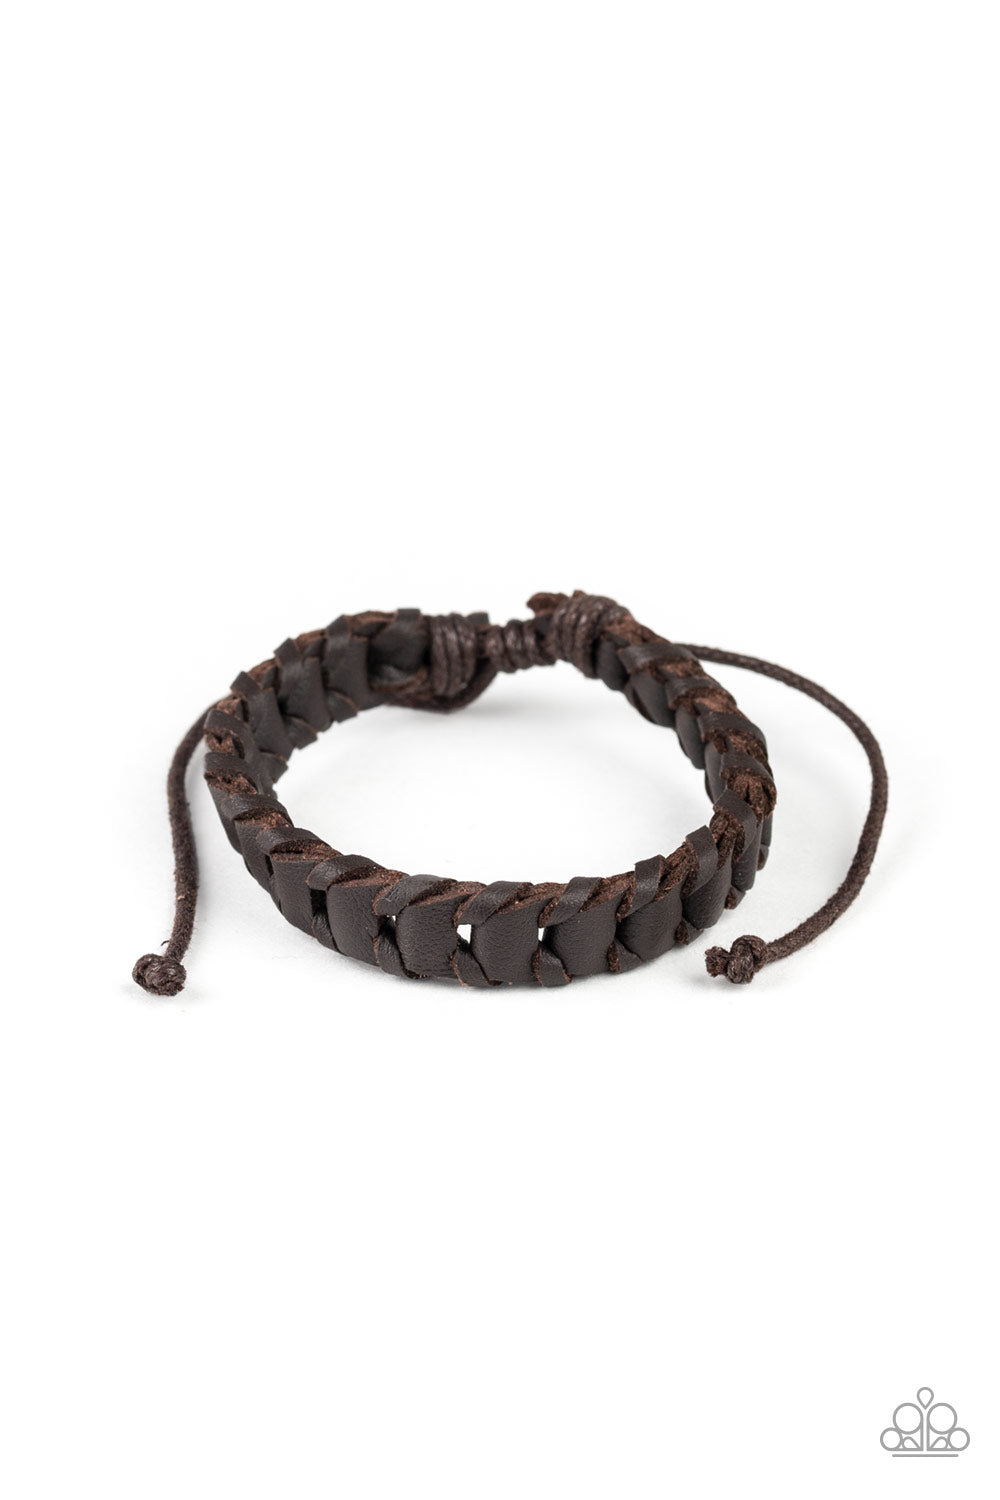 Grit and Grease Brown Urban Bracelet